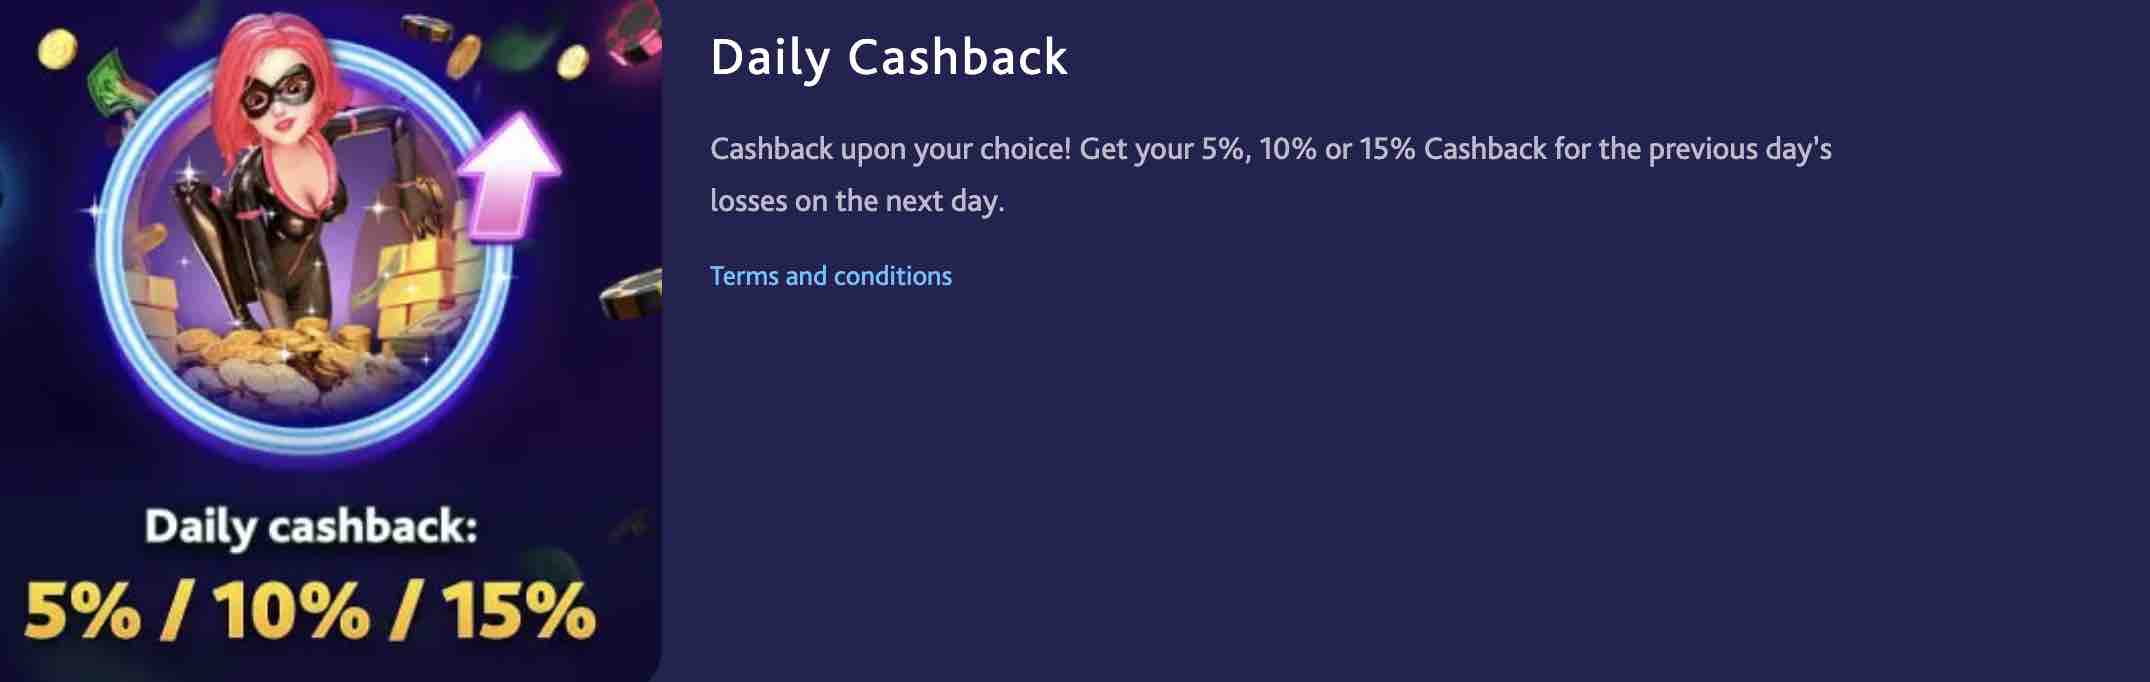 Screenshot of the Daily Cashback offer on the 7bit casino website